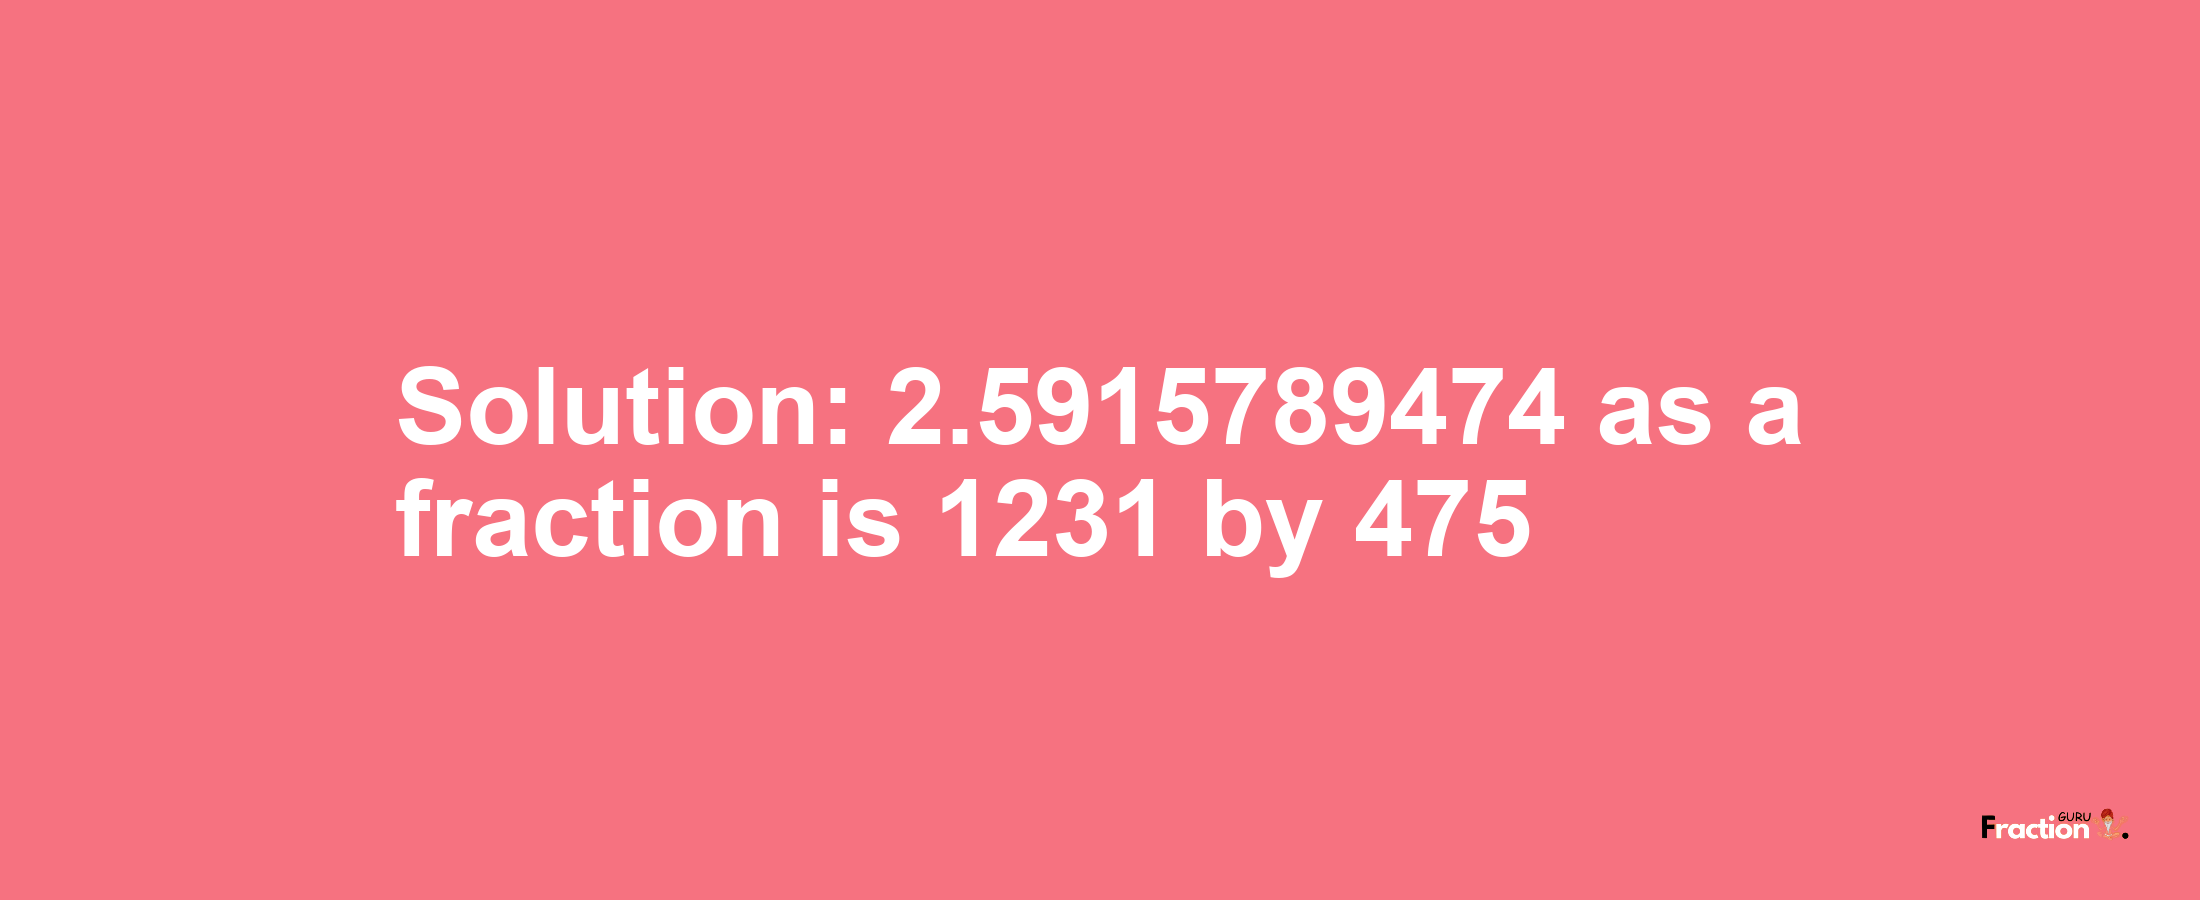 Solution:2.5915789474 as a fraction is 1231/475